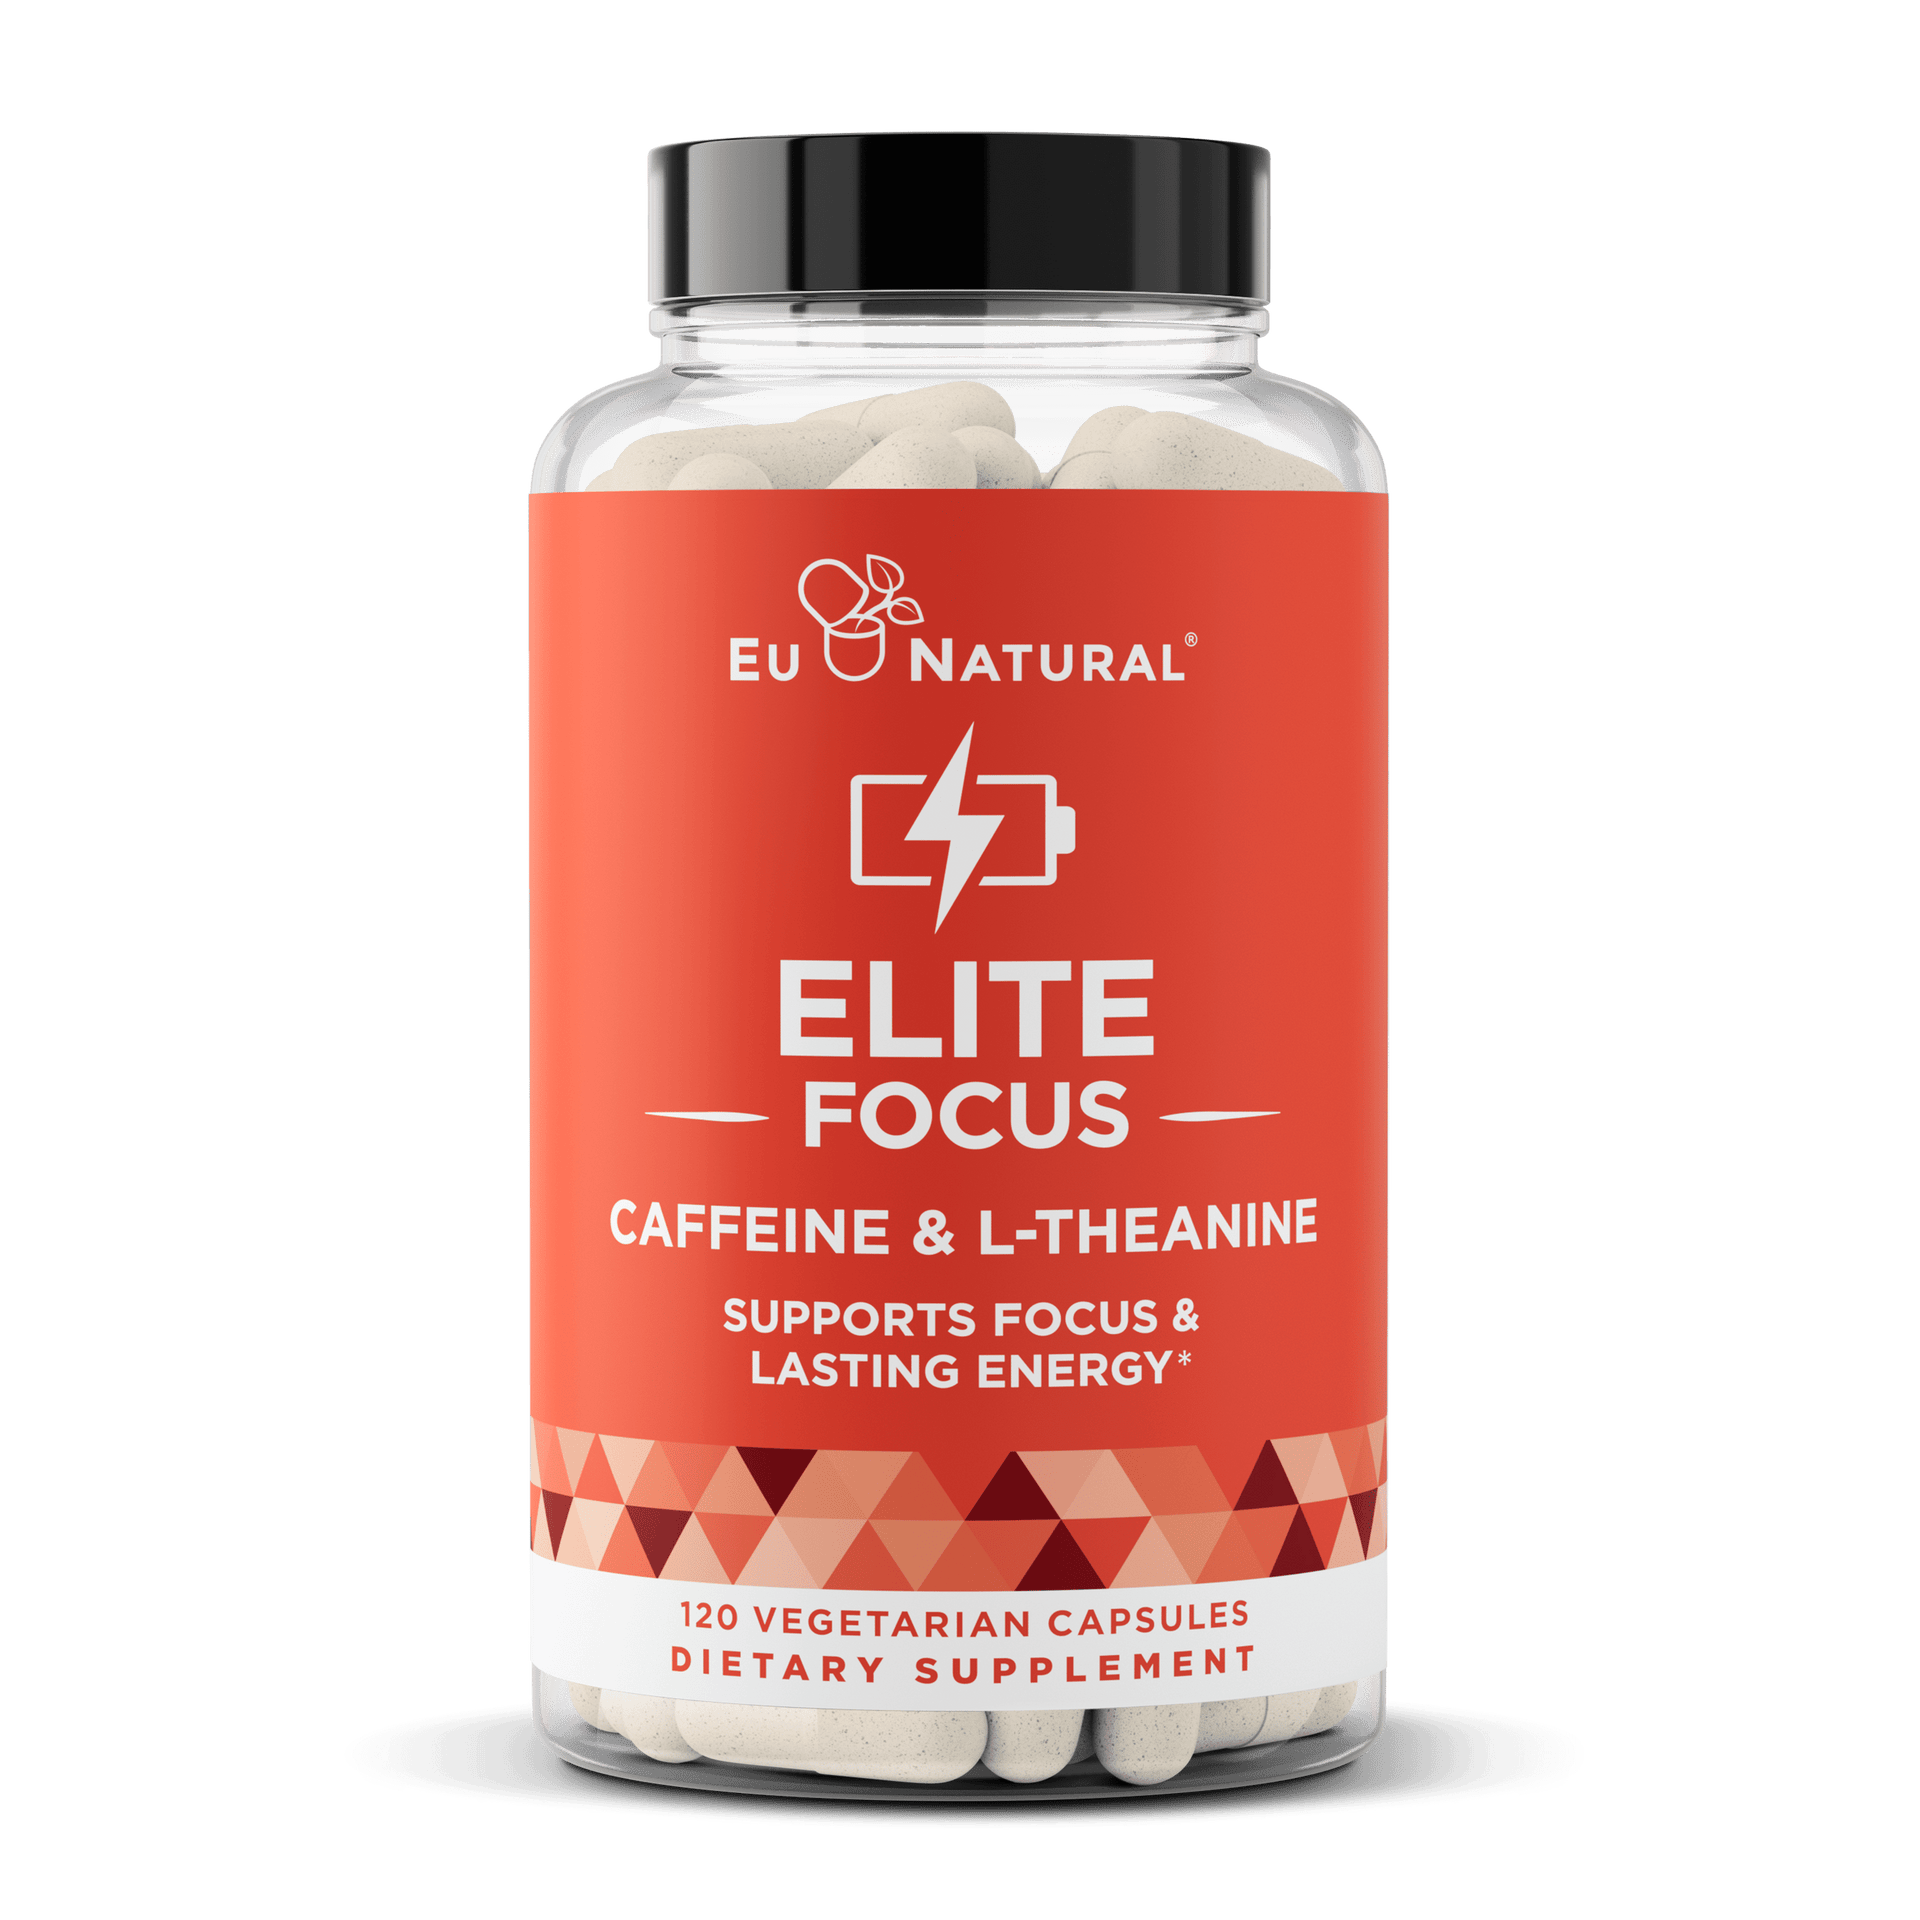 Eu Natural ELITE FOCUS — Clinically Researched Nootropic Blend